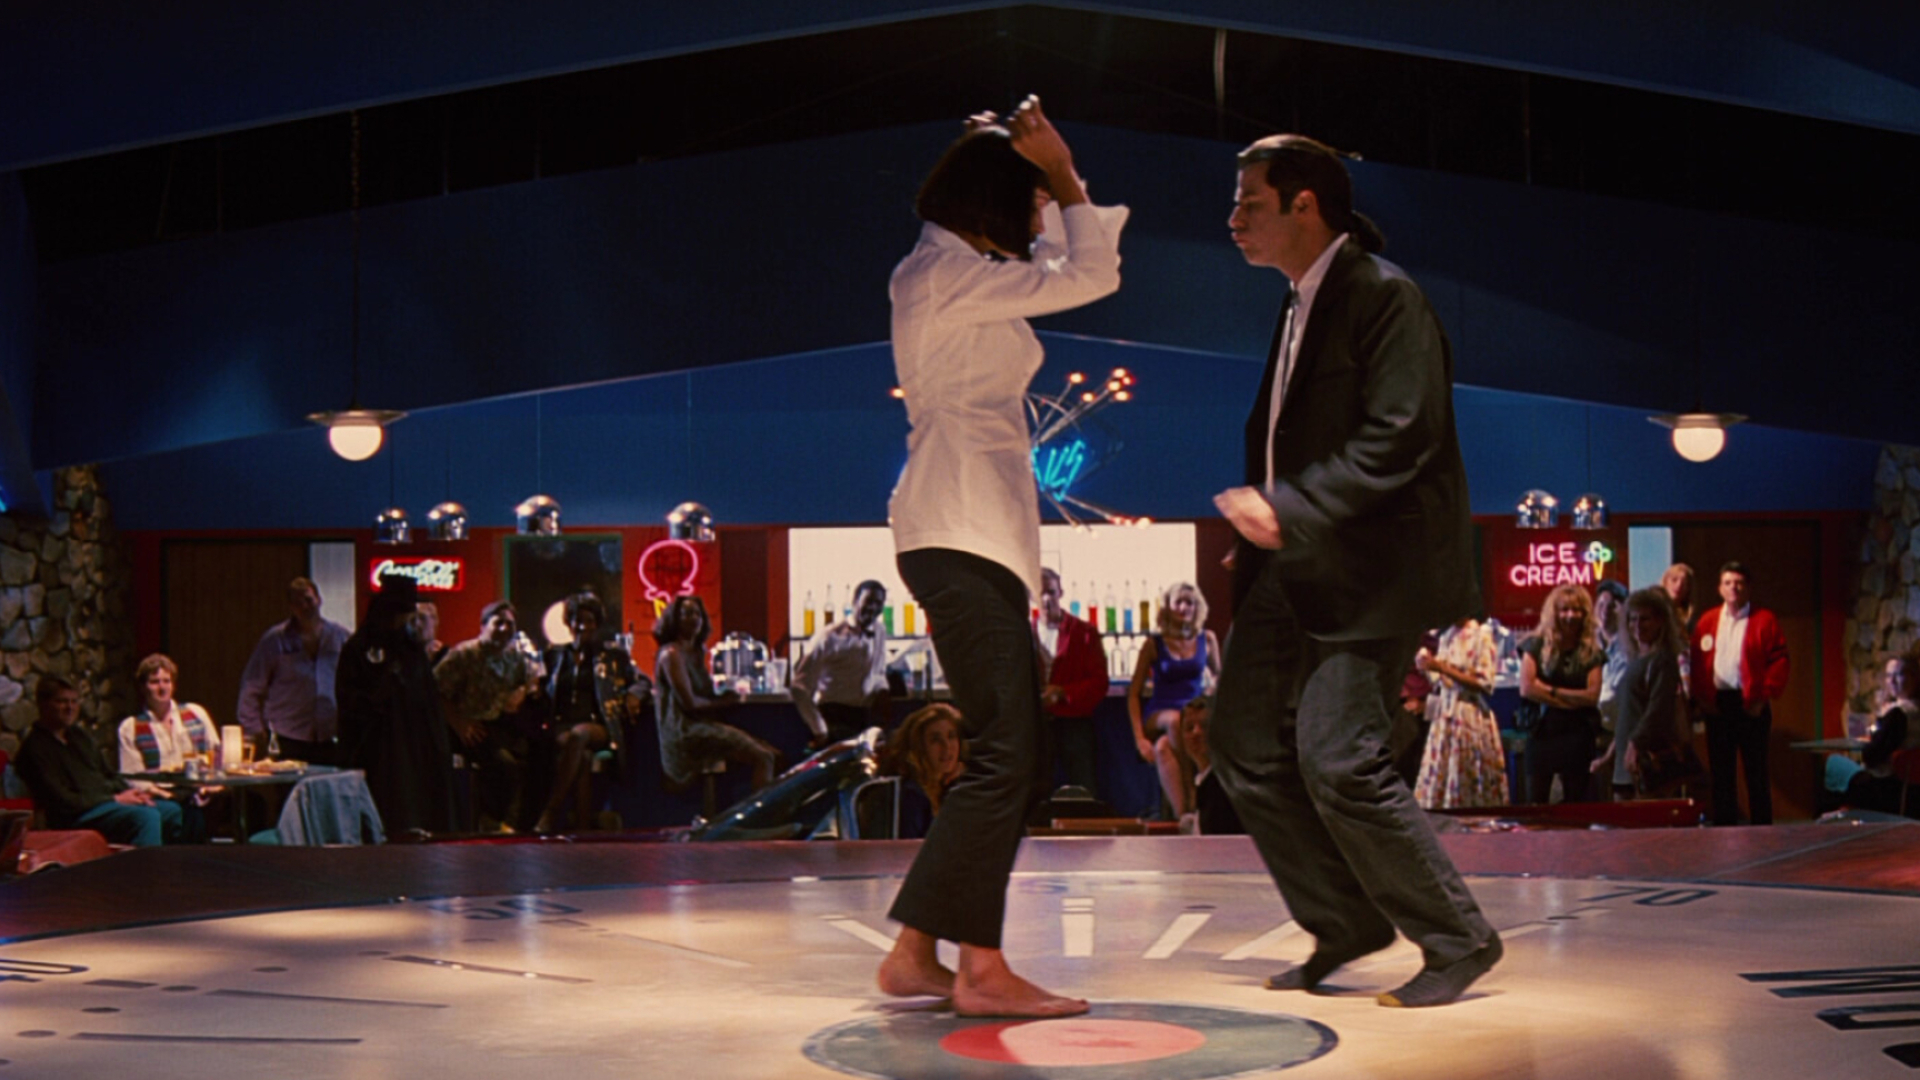 Pulp Fiction: Vincent Vega and Mia Wallace Dance, You Never Can Tell. 1920x1080 Full HD Background.